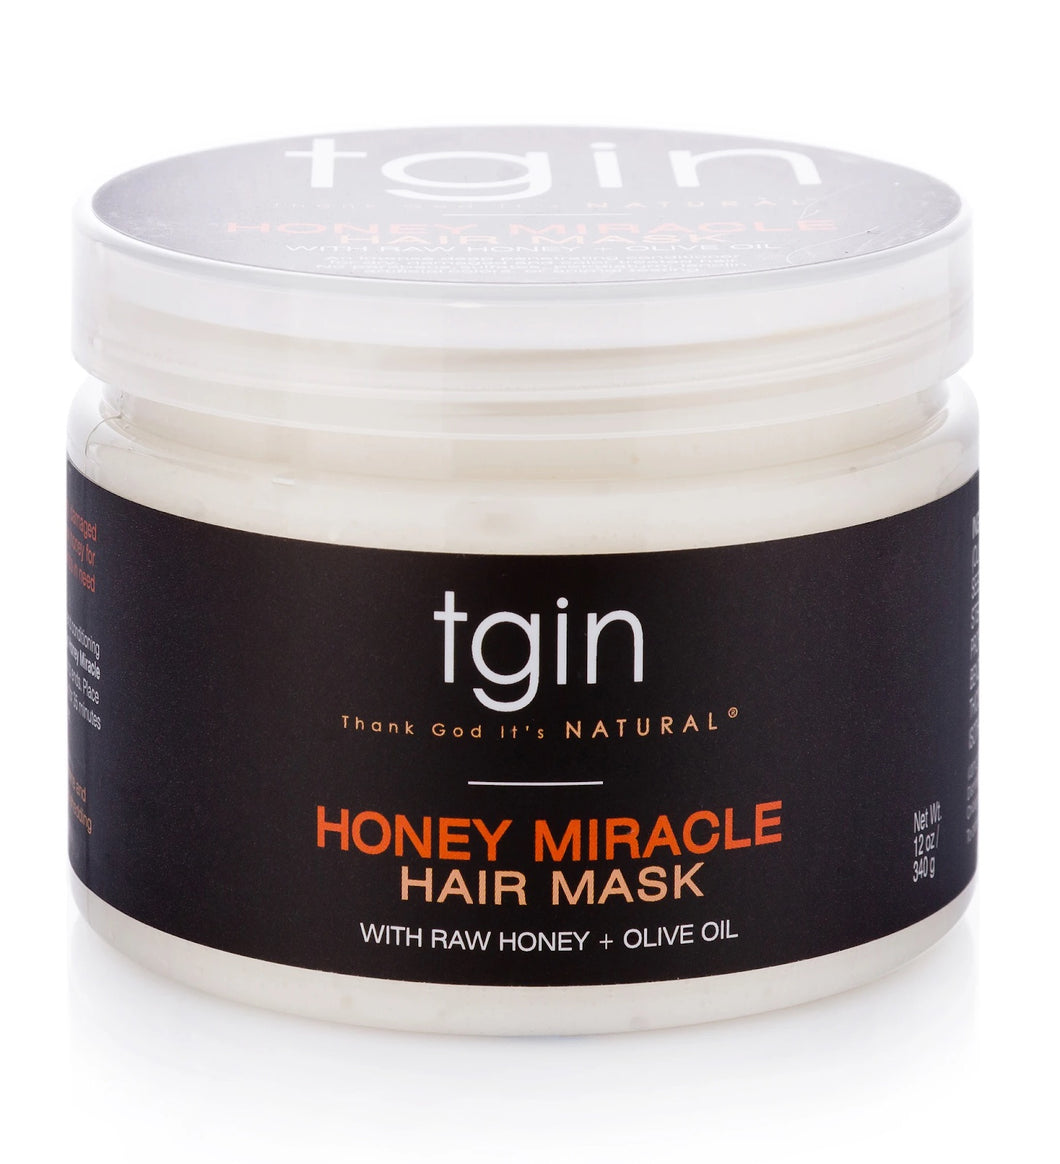 TGIN Honey Miracle Hair Mask - All Star Beauty Complex